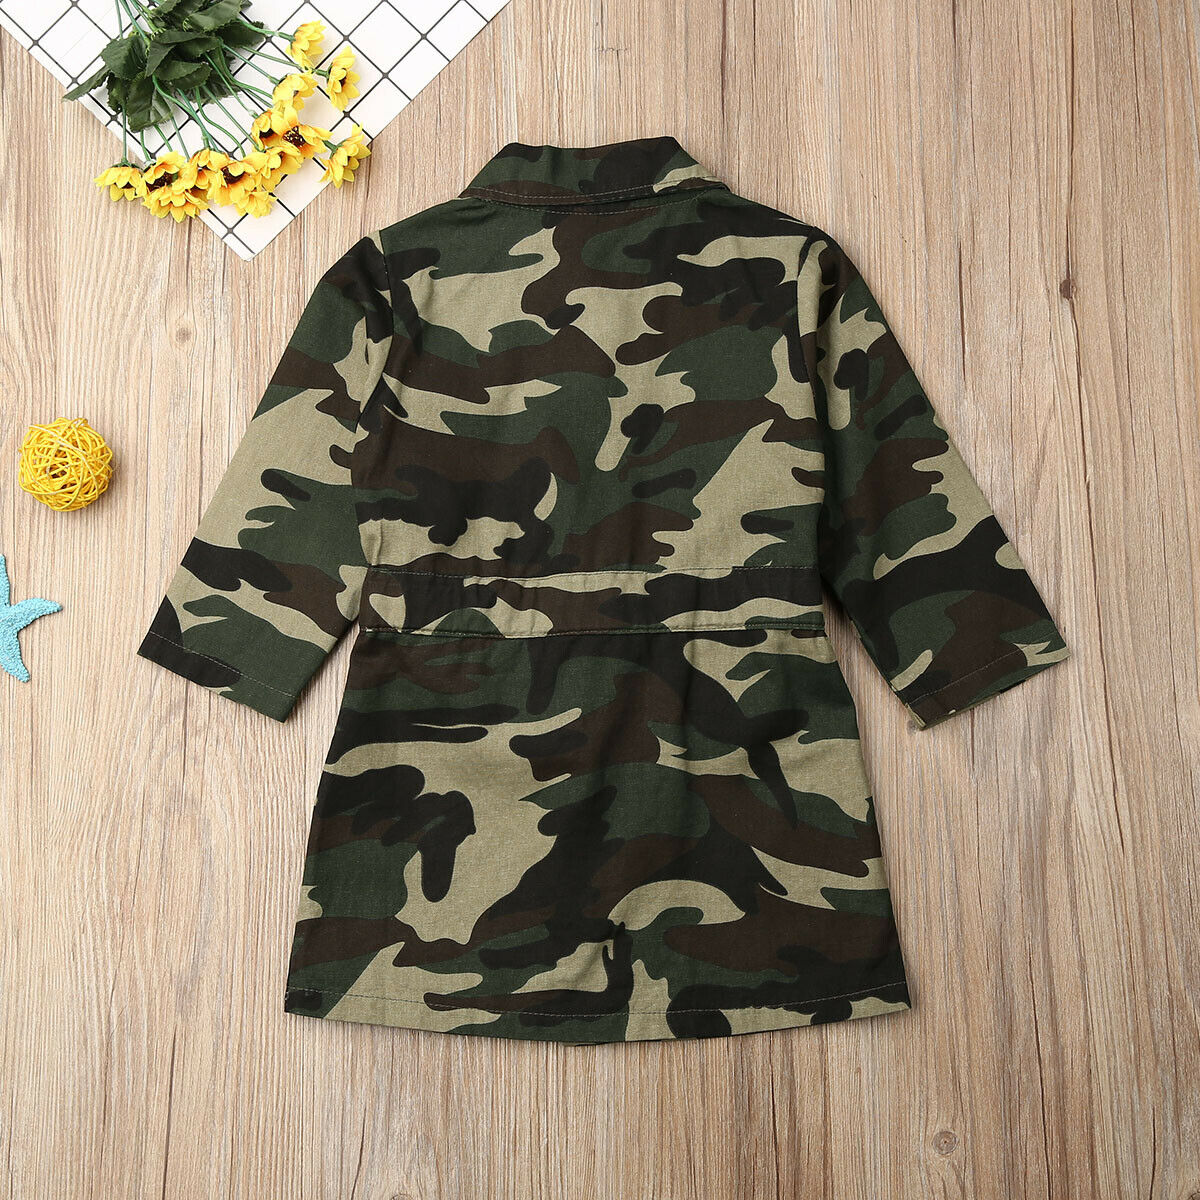 Toddlers Girls Kids Trench Coat Camouflage Long Trench Casual Jacket for Girls Coat Outwear Dress Autumn Clothes 1-6Y